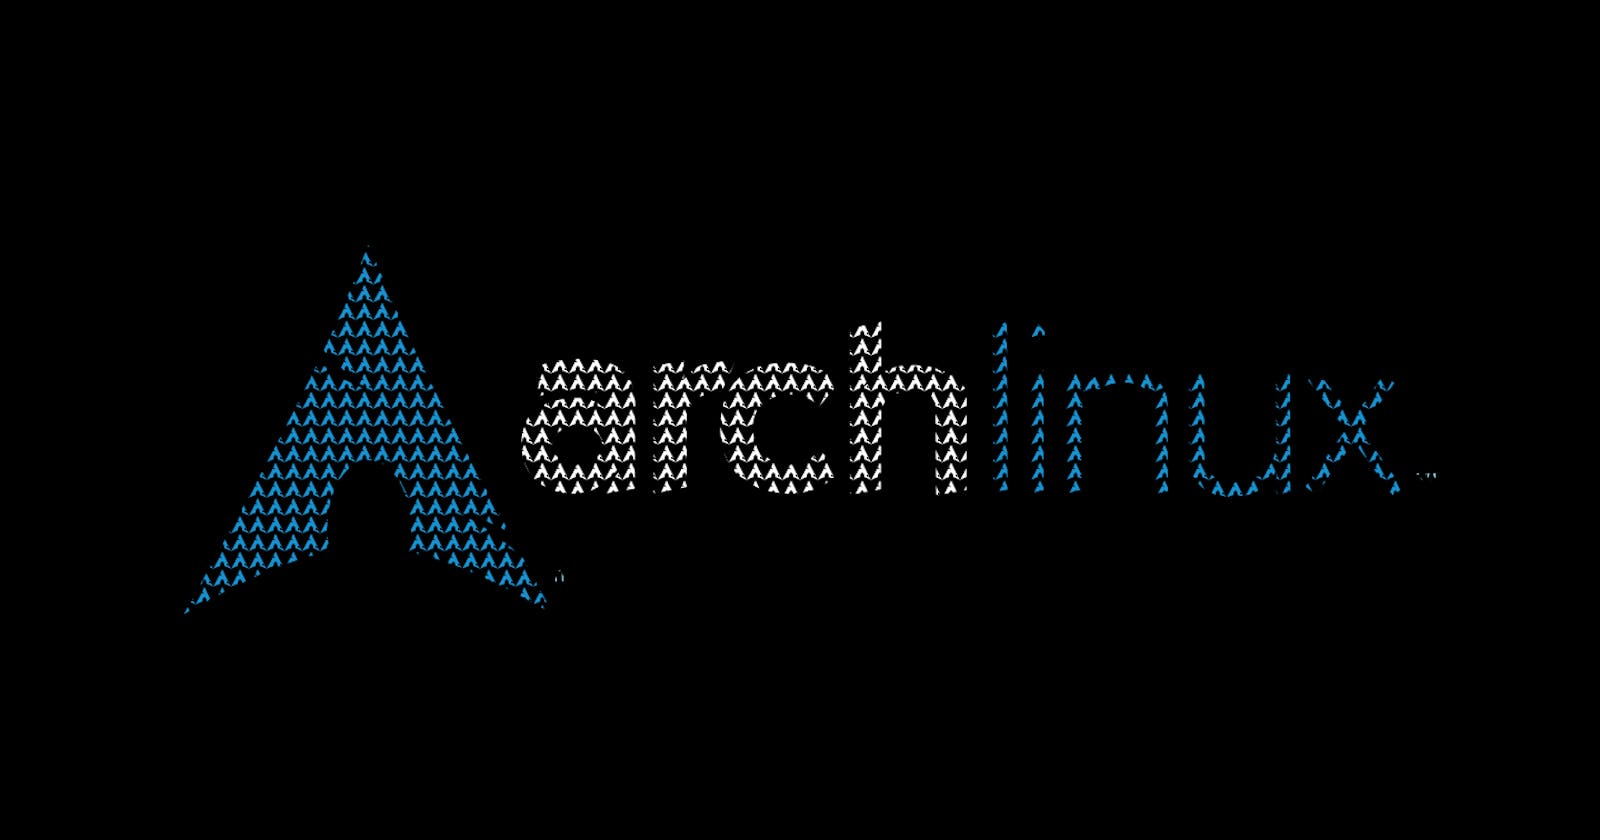 AUR - The Reason I Switched from Debian 12 to Arch Linux